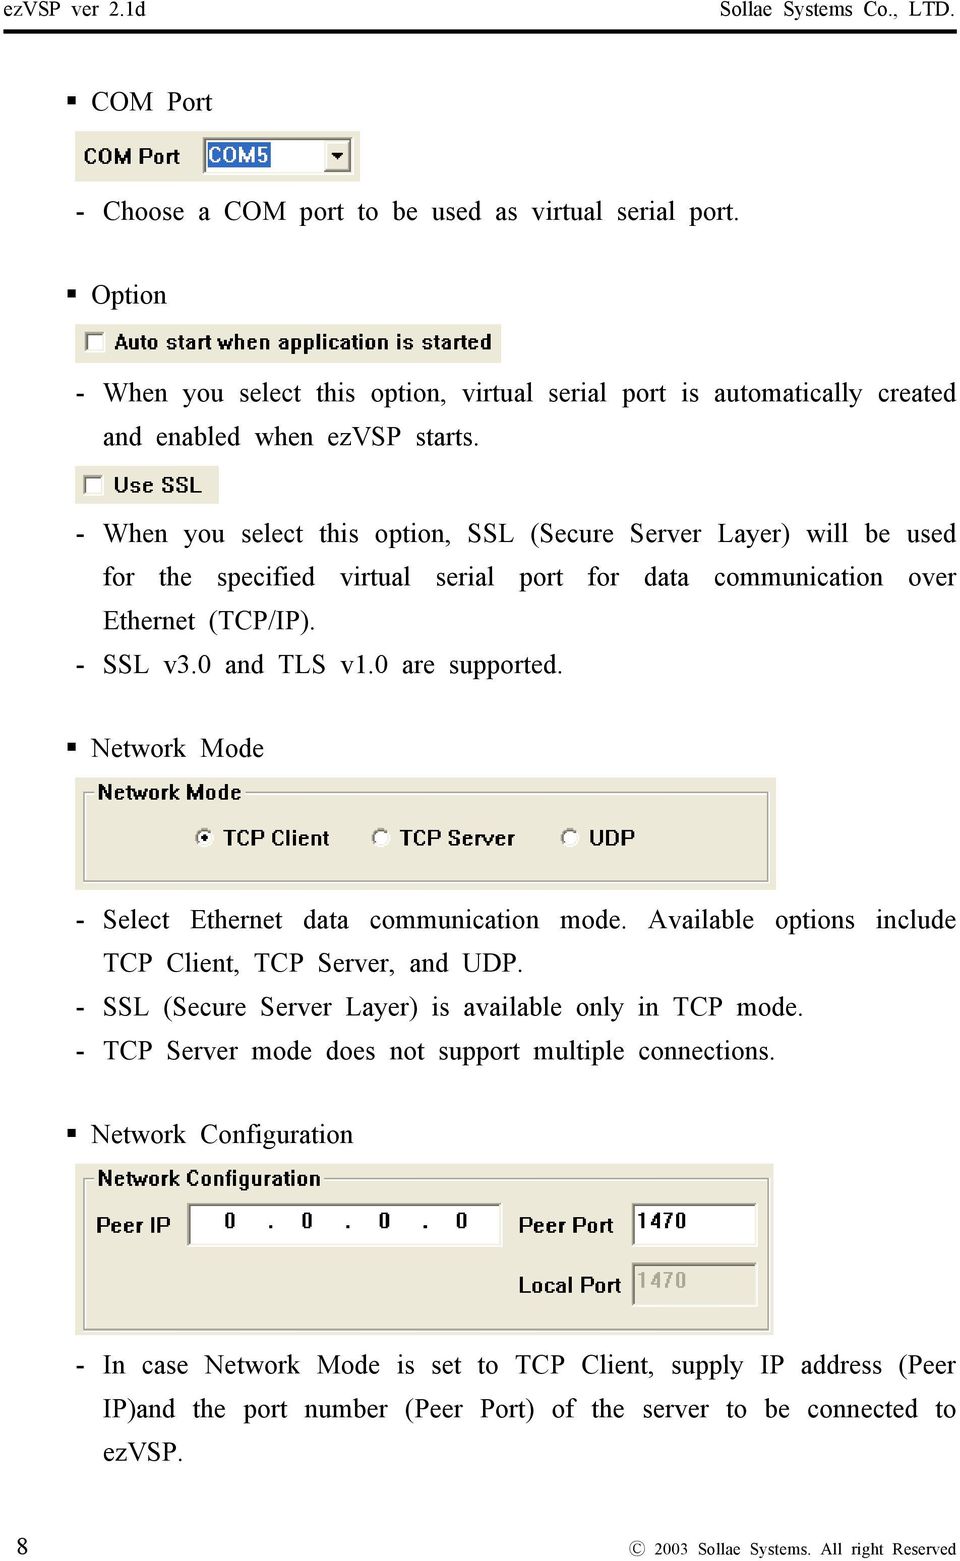 - When you select this option, SSL (Secure Server Layer) will be used for the specified virtual serial port for data communication over Ethernet (TCP/IP). - SSL v3.0 and TLS v1.0 are supported.